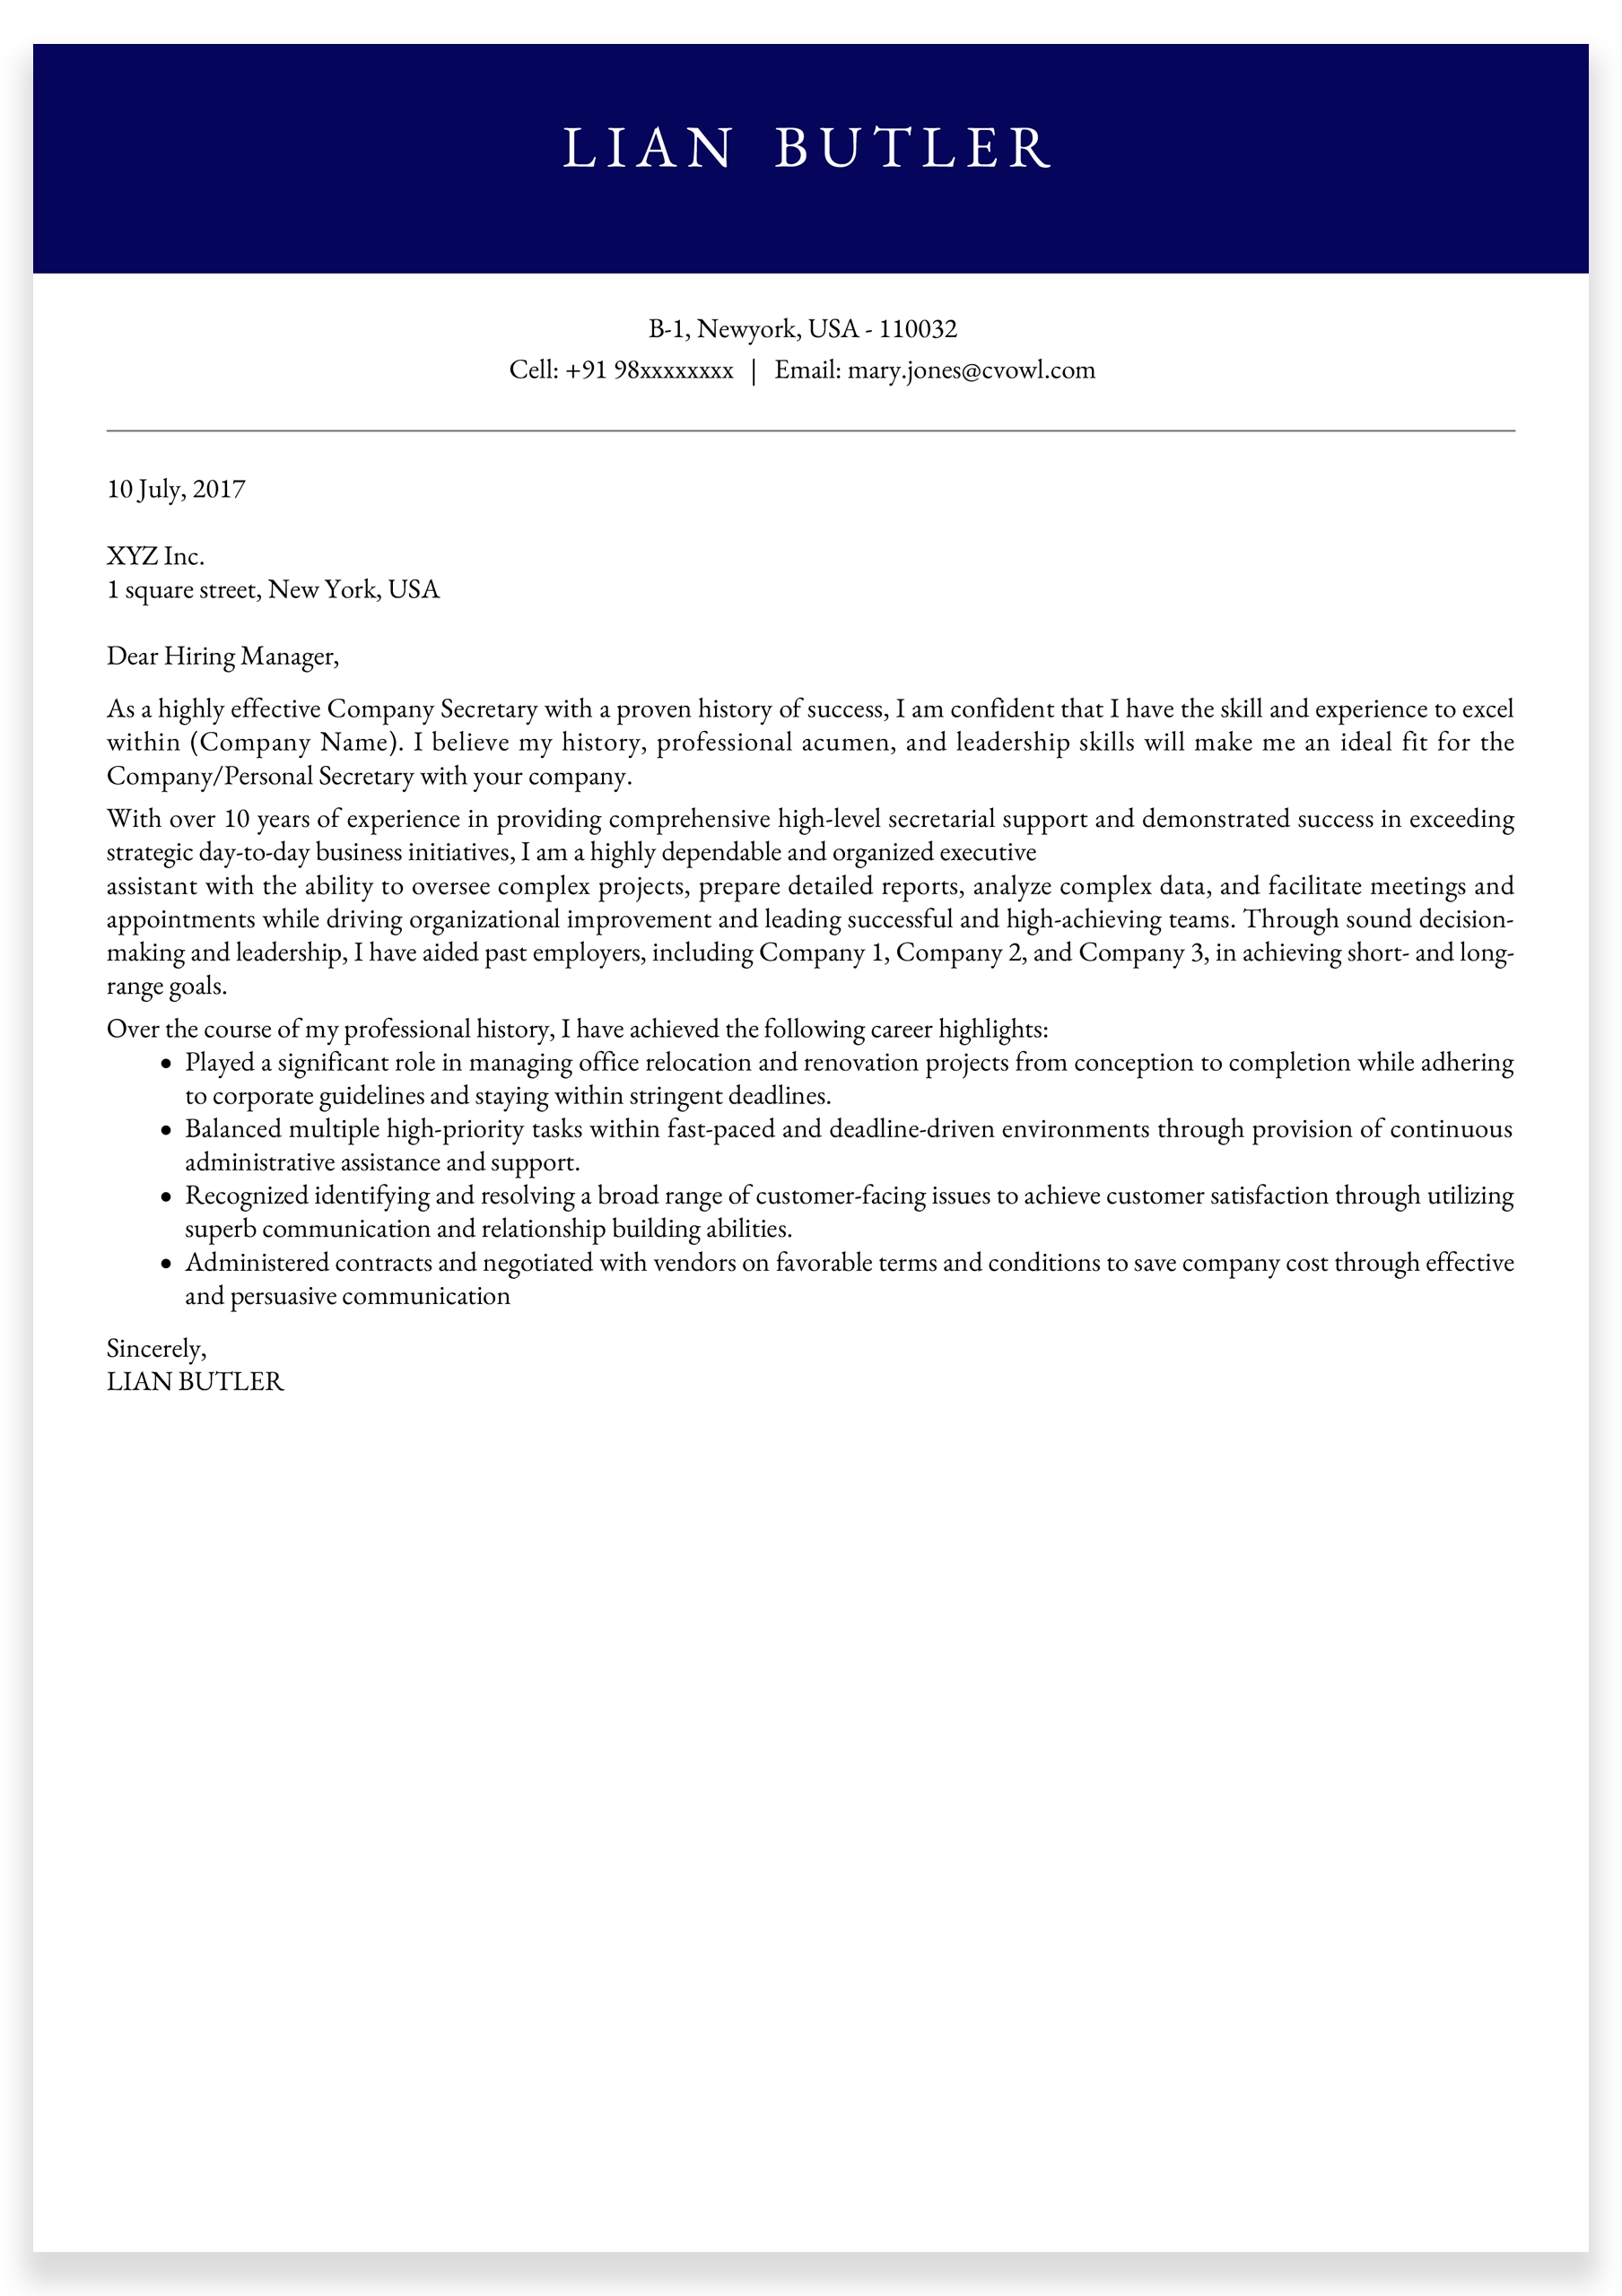 Legal-Consultant-Cover-Letter-sample8